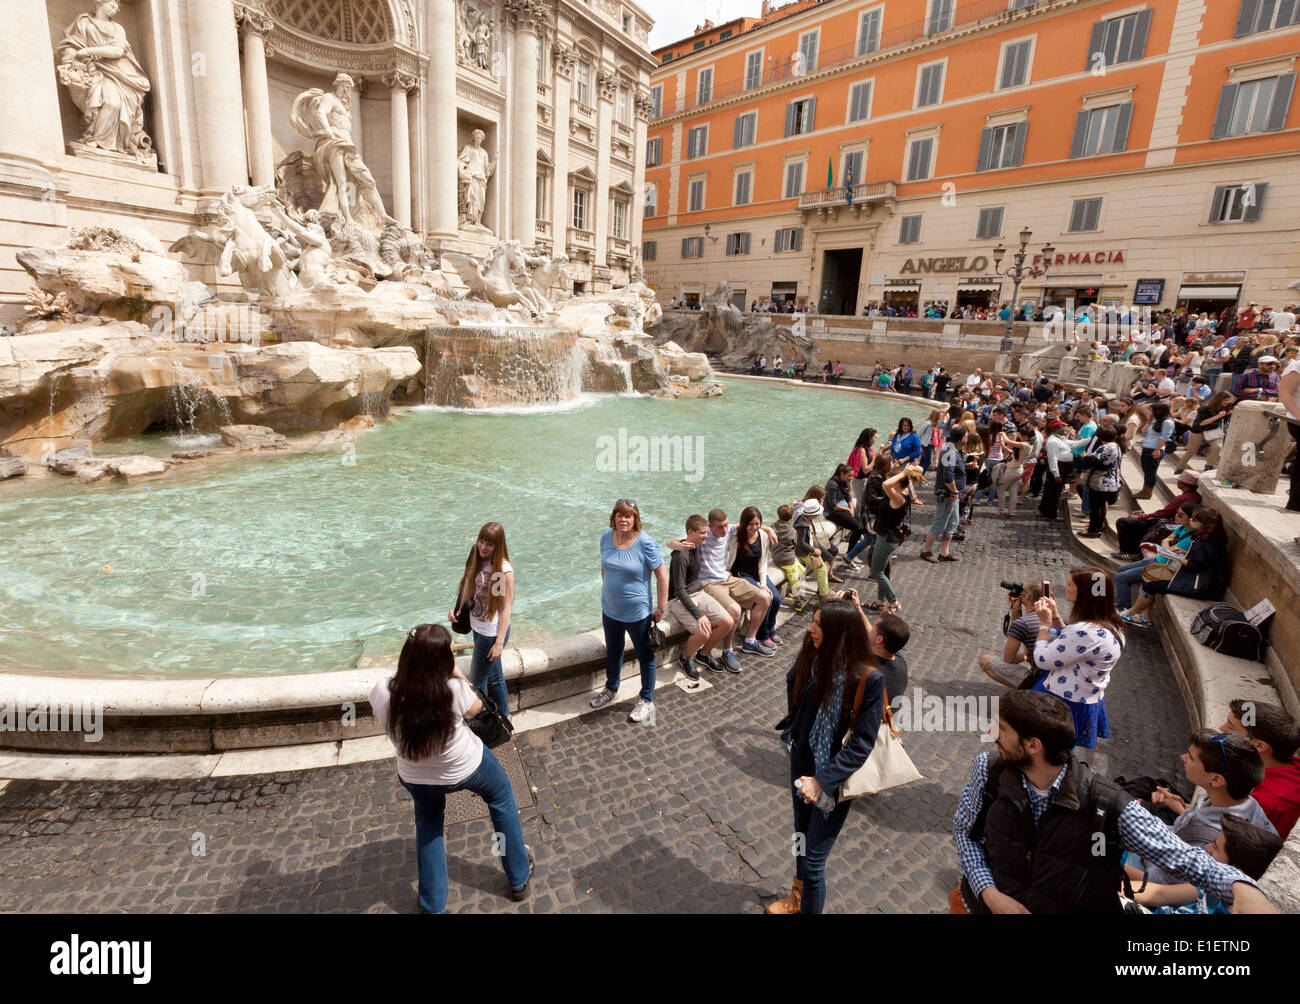 People taking photos at the Trevi fountain, Rome Italy Europe Stock Photo